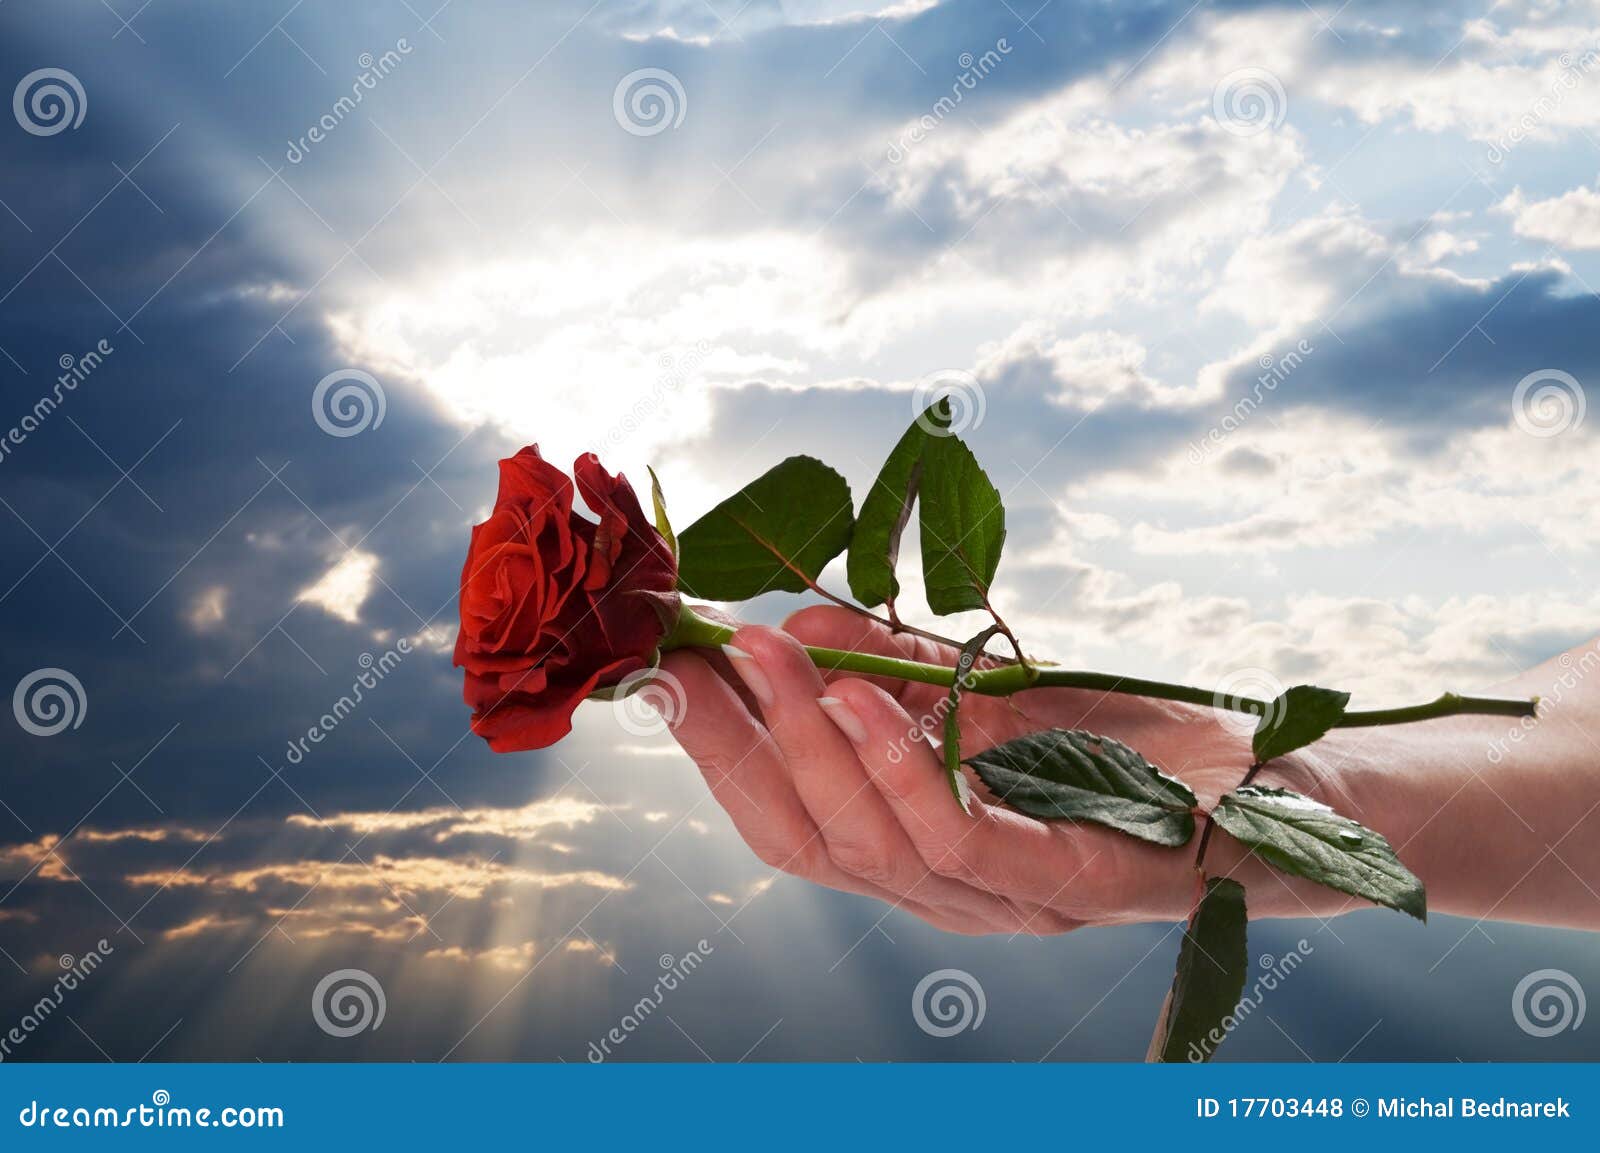 Holding red rose in a romantic scenery, sunset sky. Valentine Day ...